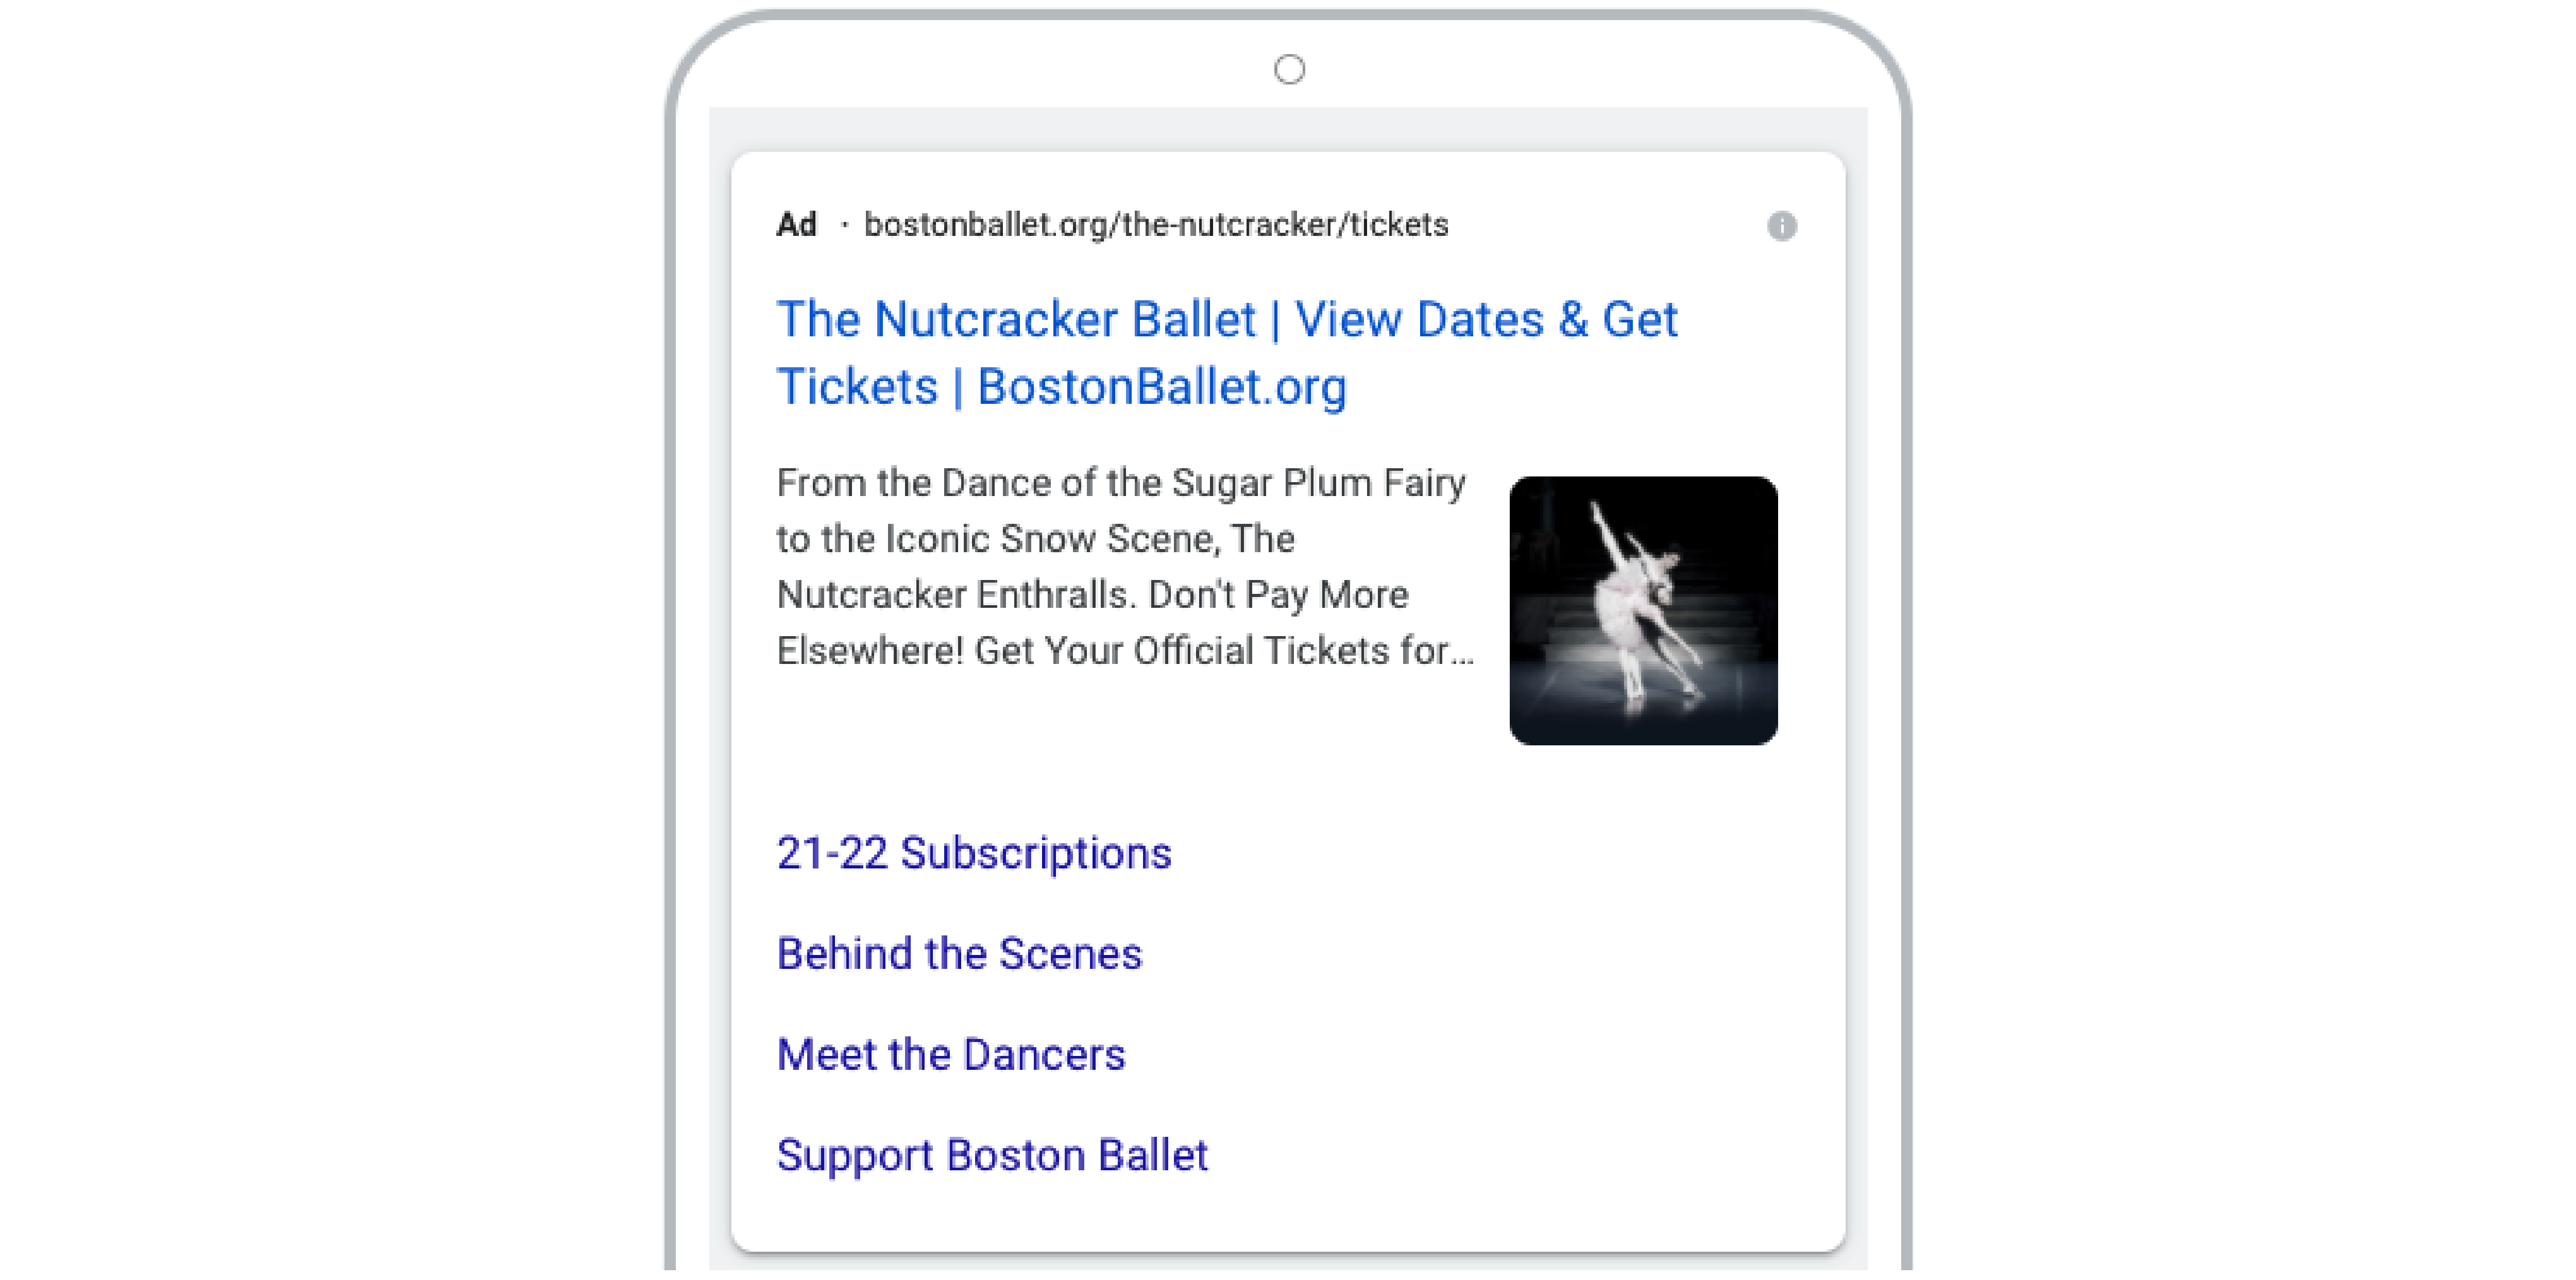 SERP result for The Nutcracker Ballet with a performance shot as the image extension.